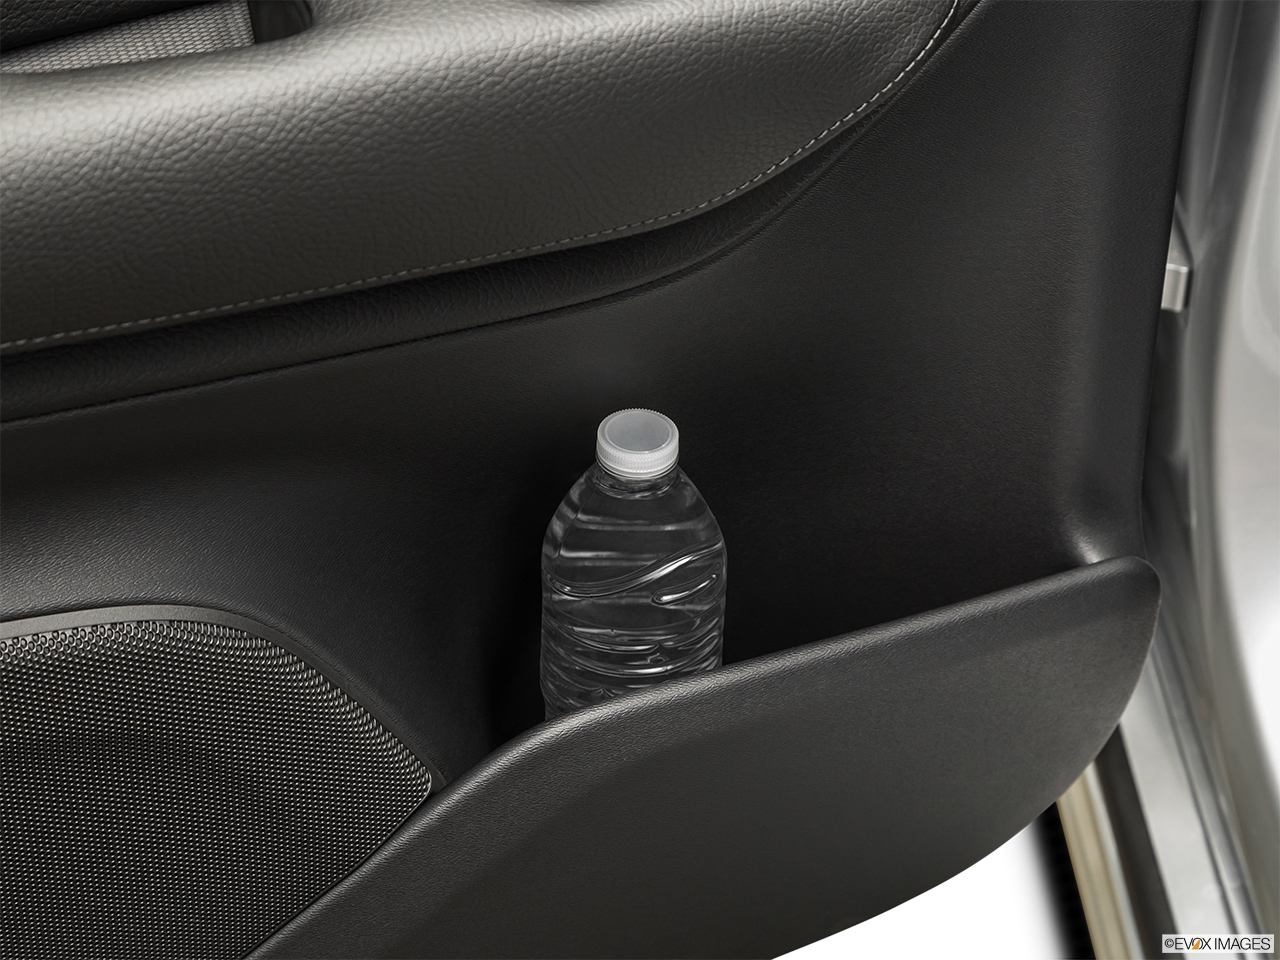 2019 Volvo XC90  T6 Momentum Second row side cup holder with coffee prop, or second row door cup holder with water bottle. 